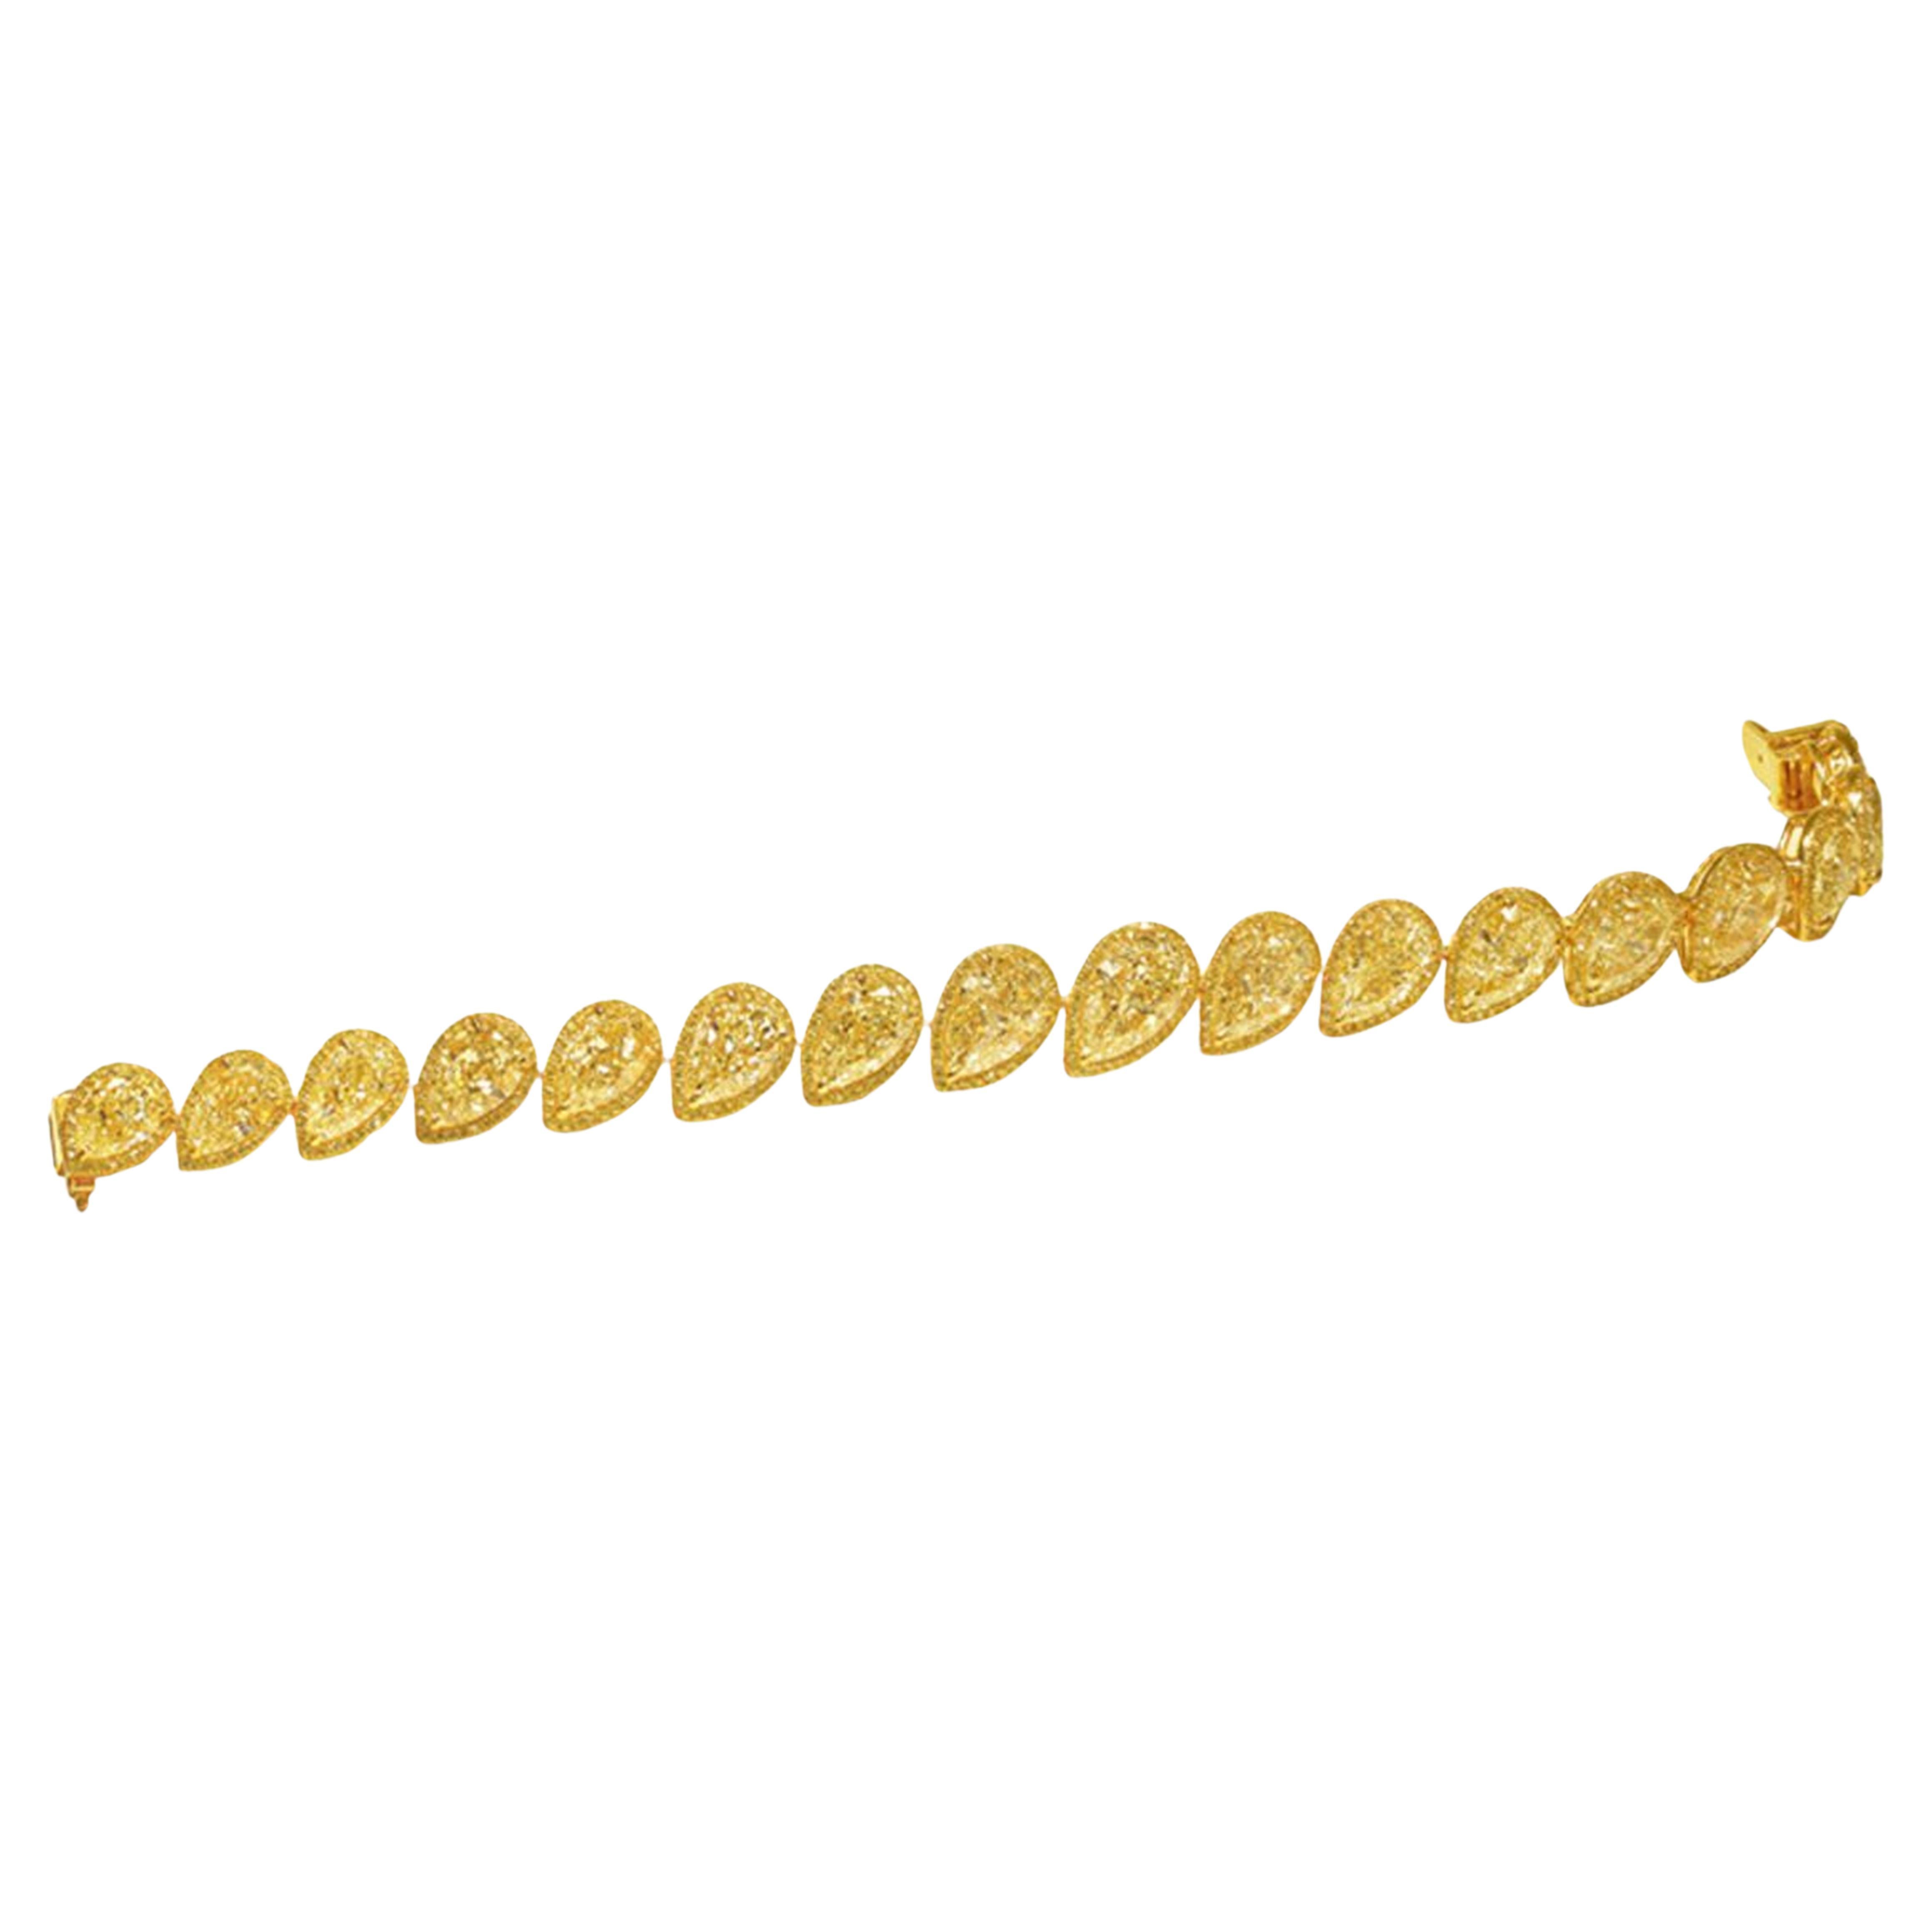 a truly spectacular adornment for the wrist - the 35 carat Pear Shape Yellow Diamond Bracelet, certified by GIA, promises to captivate with its unparalleled beauty and sophistication.

This immaculate bracelet features a stunning collection of 17